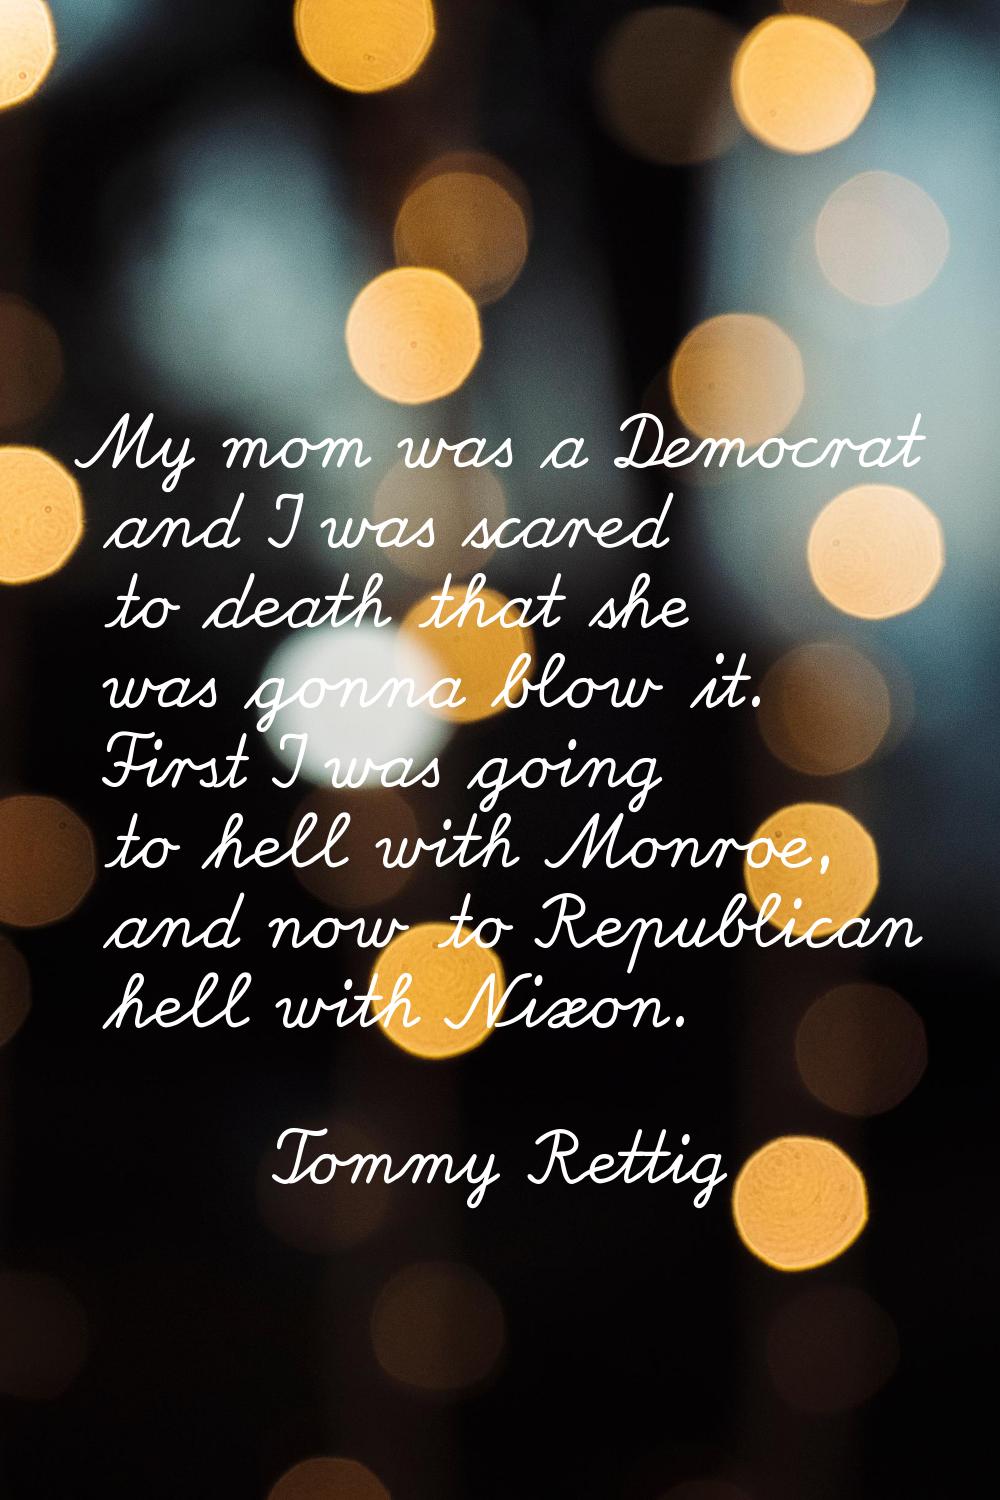 My mom was a Democrat and I was scared to death that she was gonna blow it. First I was going to he